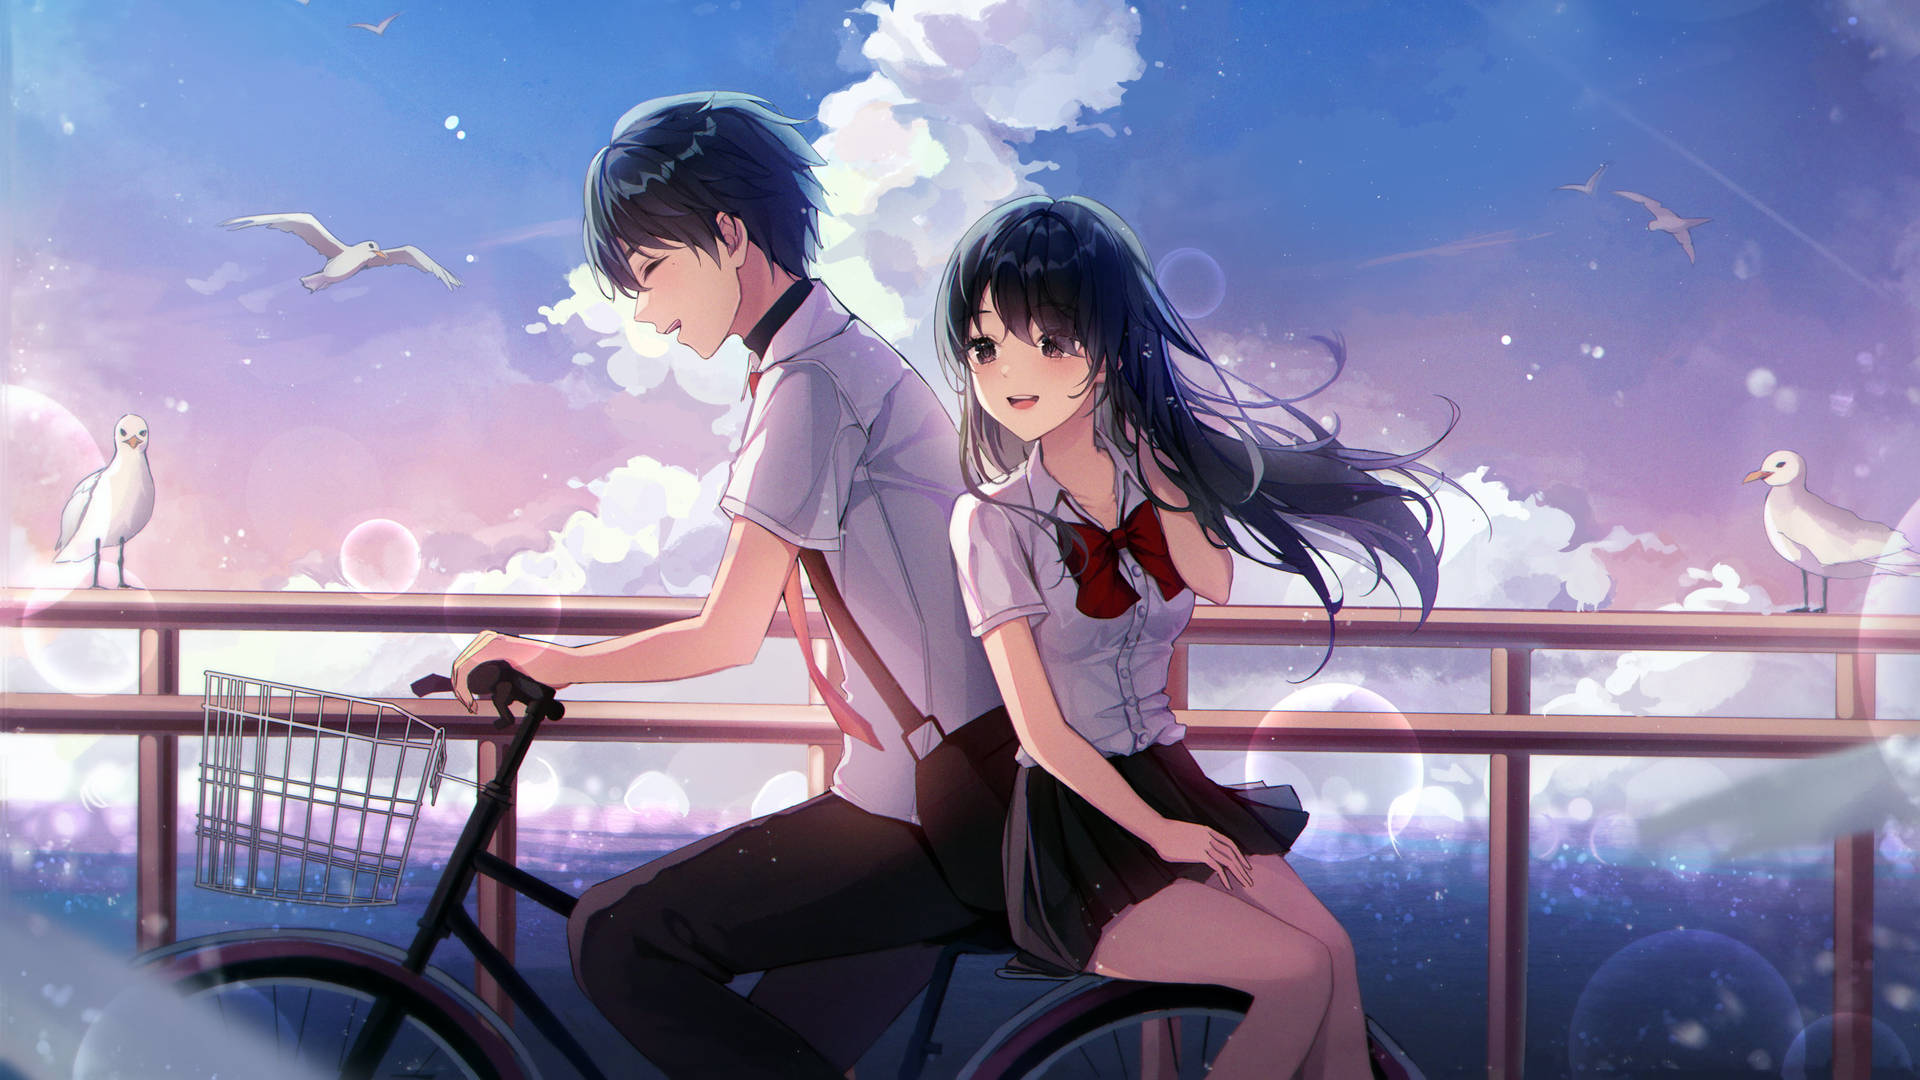 Cute Anime Couple Sharing A Bicycle